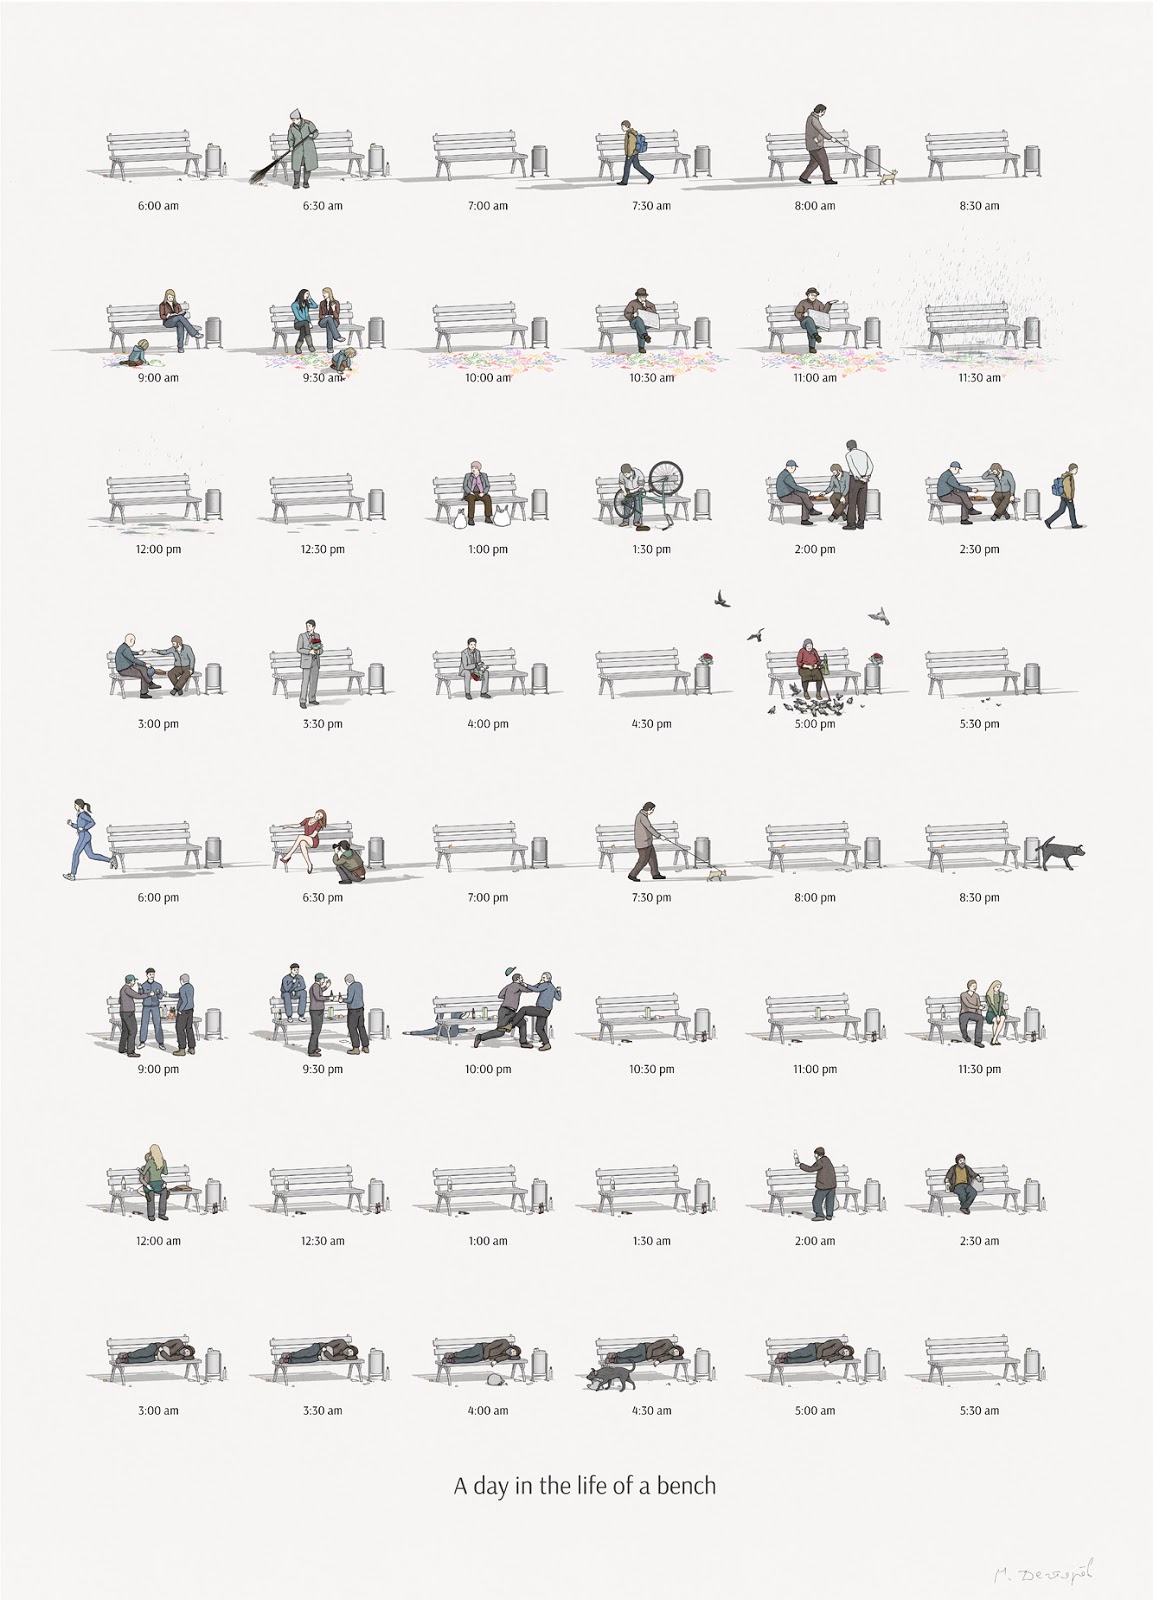 General 1153x1600 white background digital art bench portrait display drawing life old people playing fighting sleeping dog love children bicycle birds empty  homeless numbers timelapse